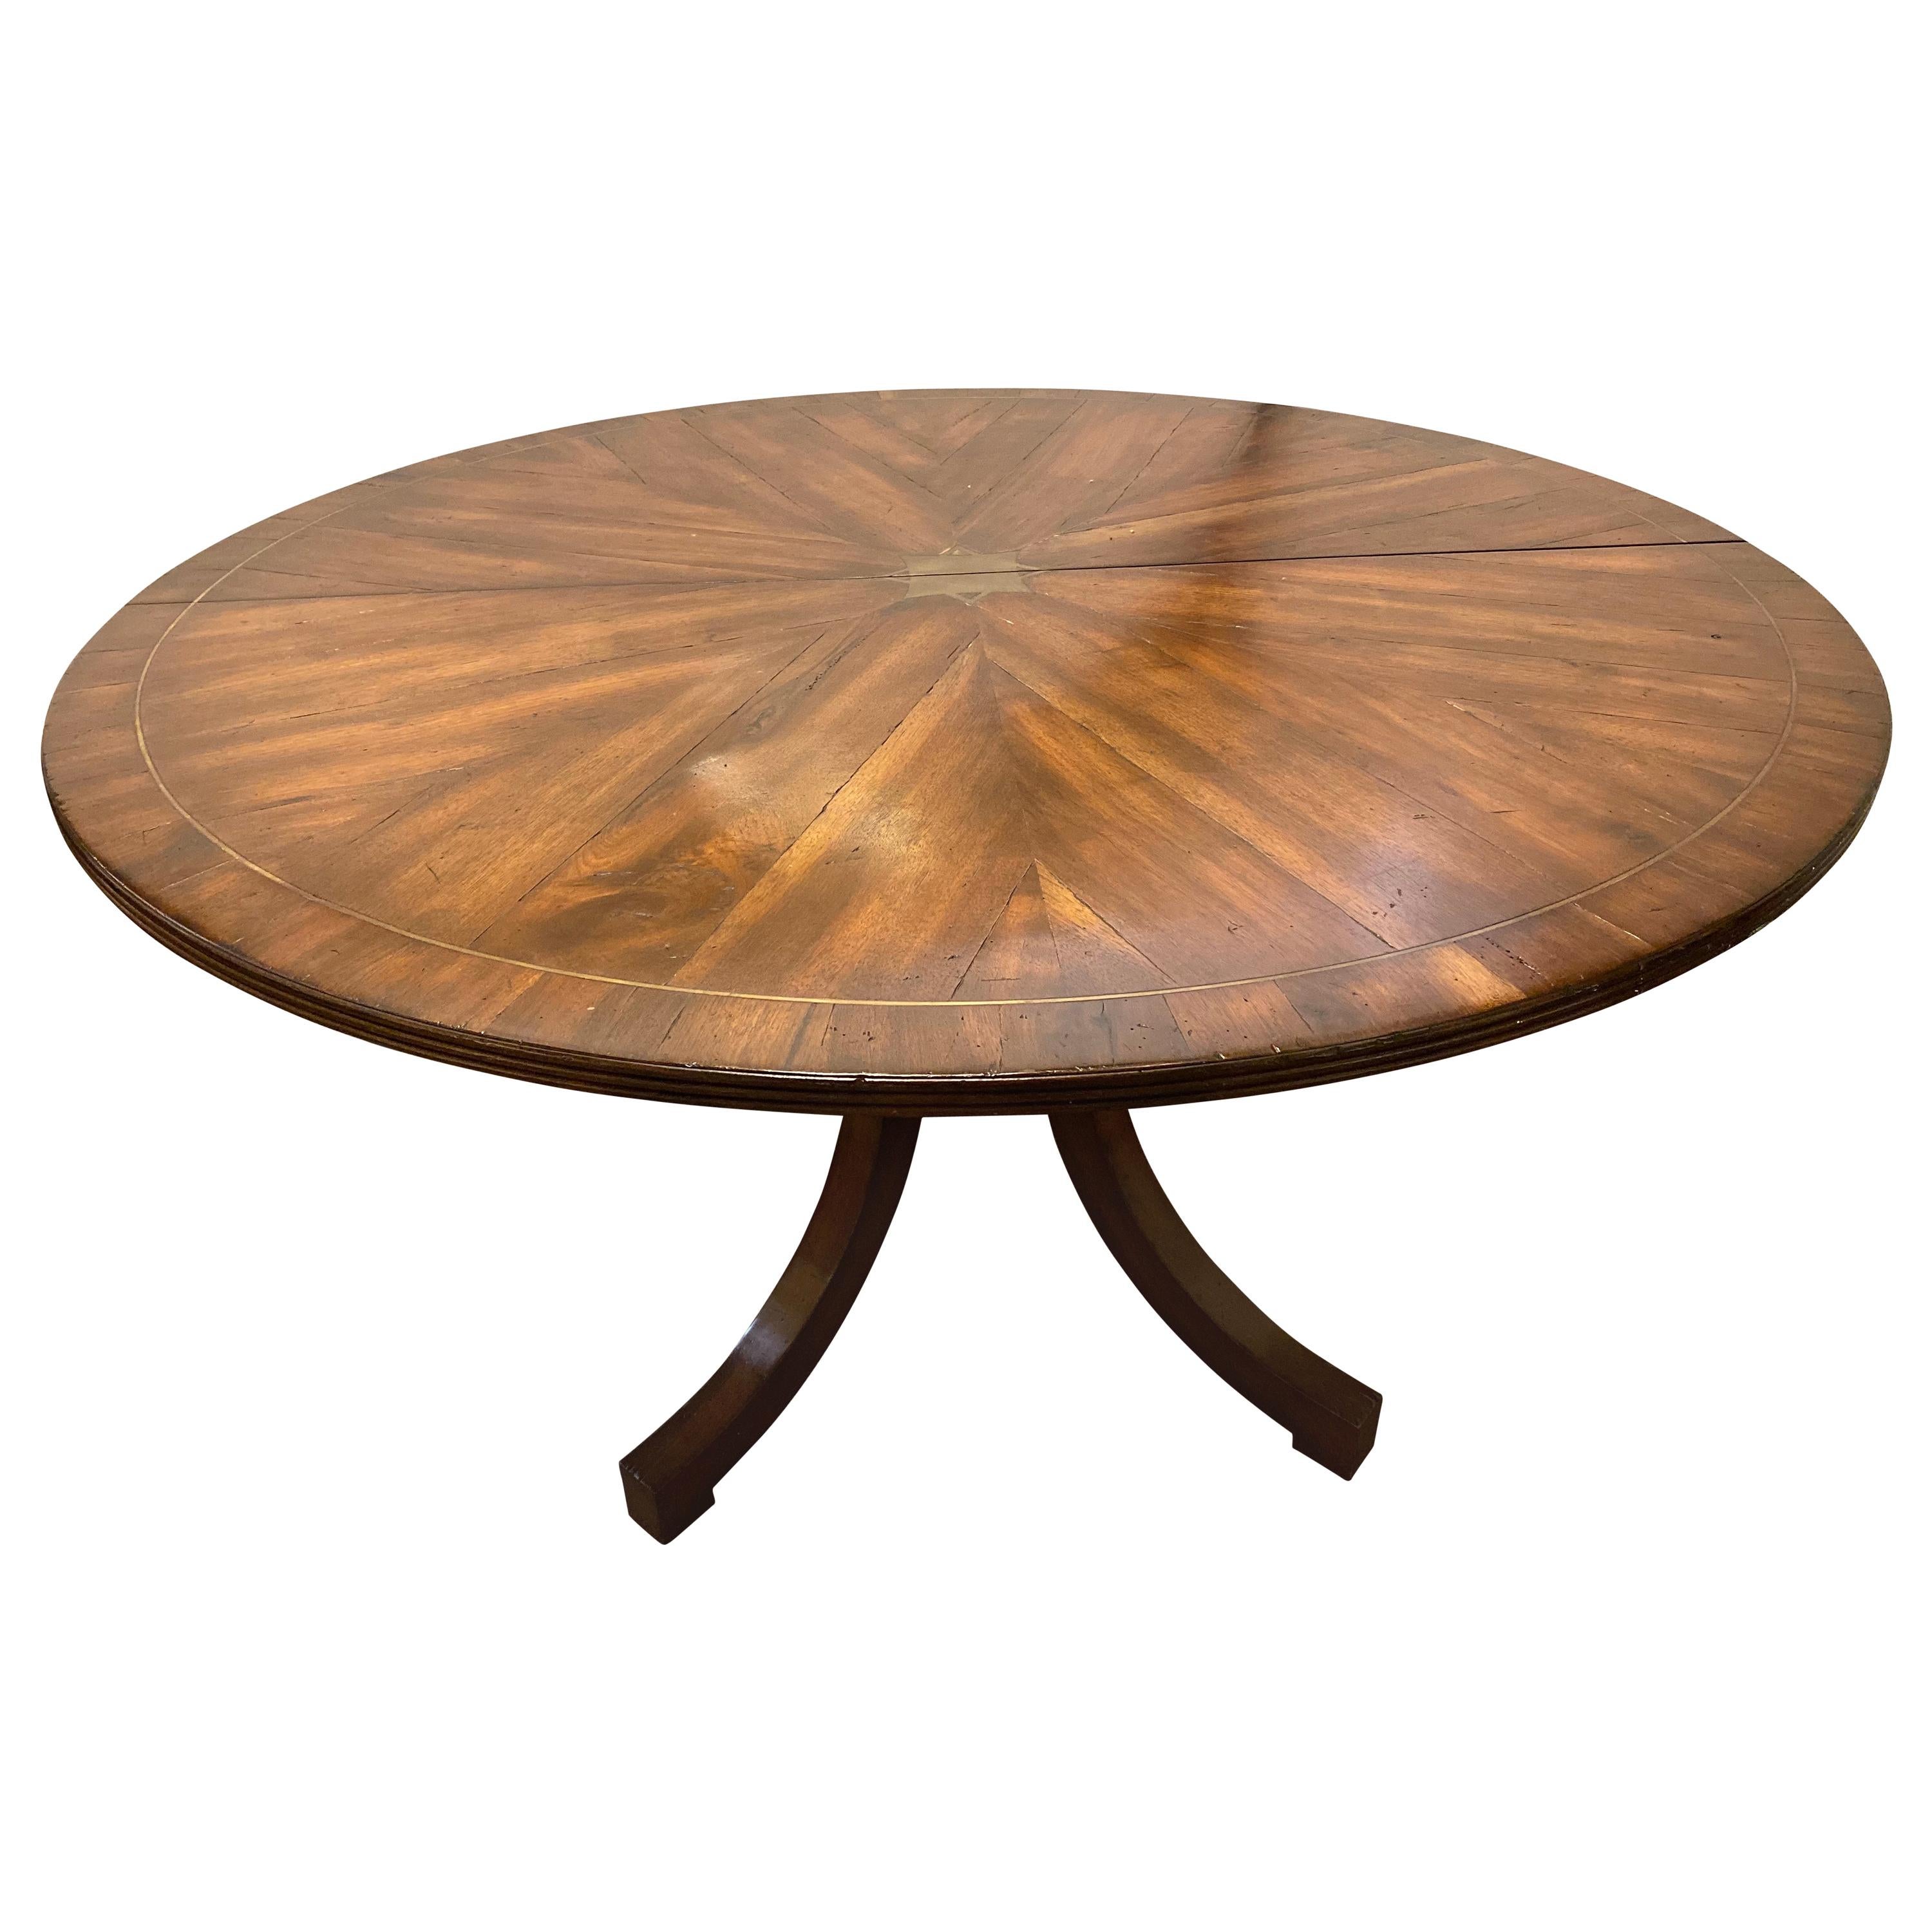 Rustic Circular Boule Inlaid Dining or Kitchen Table, Single Pedestal